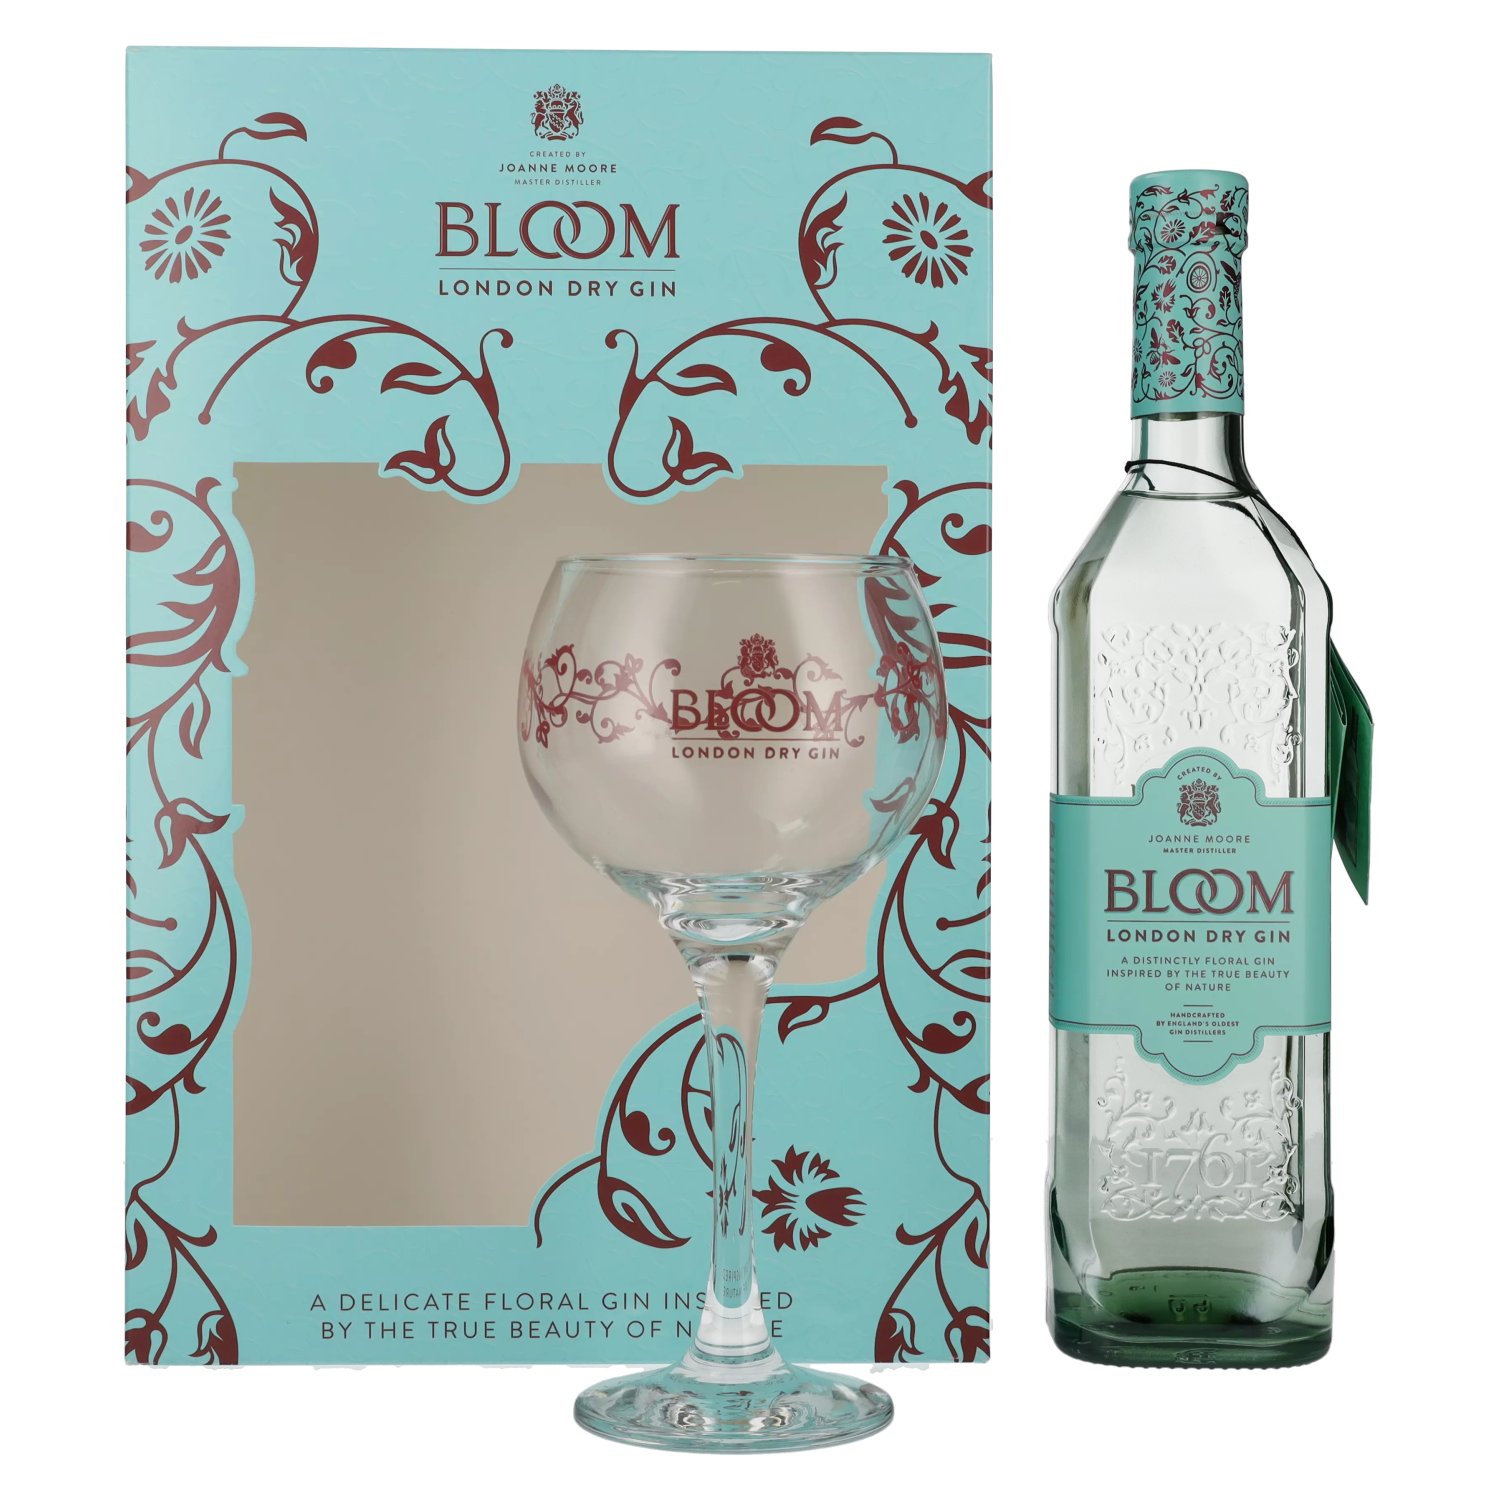 Bloom London Dry glass 40% Vol. 0,7l in Giftbox Gin with